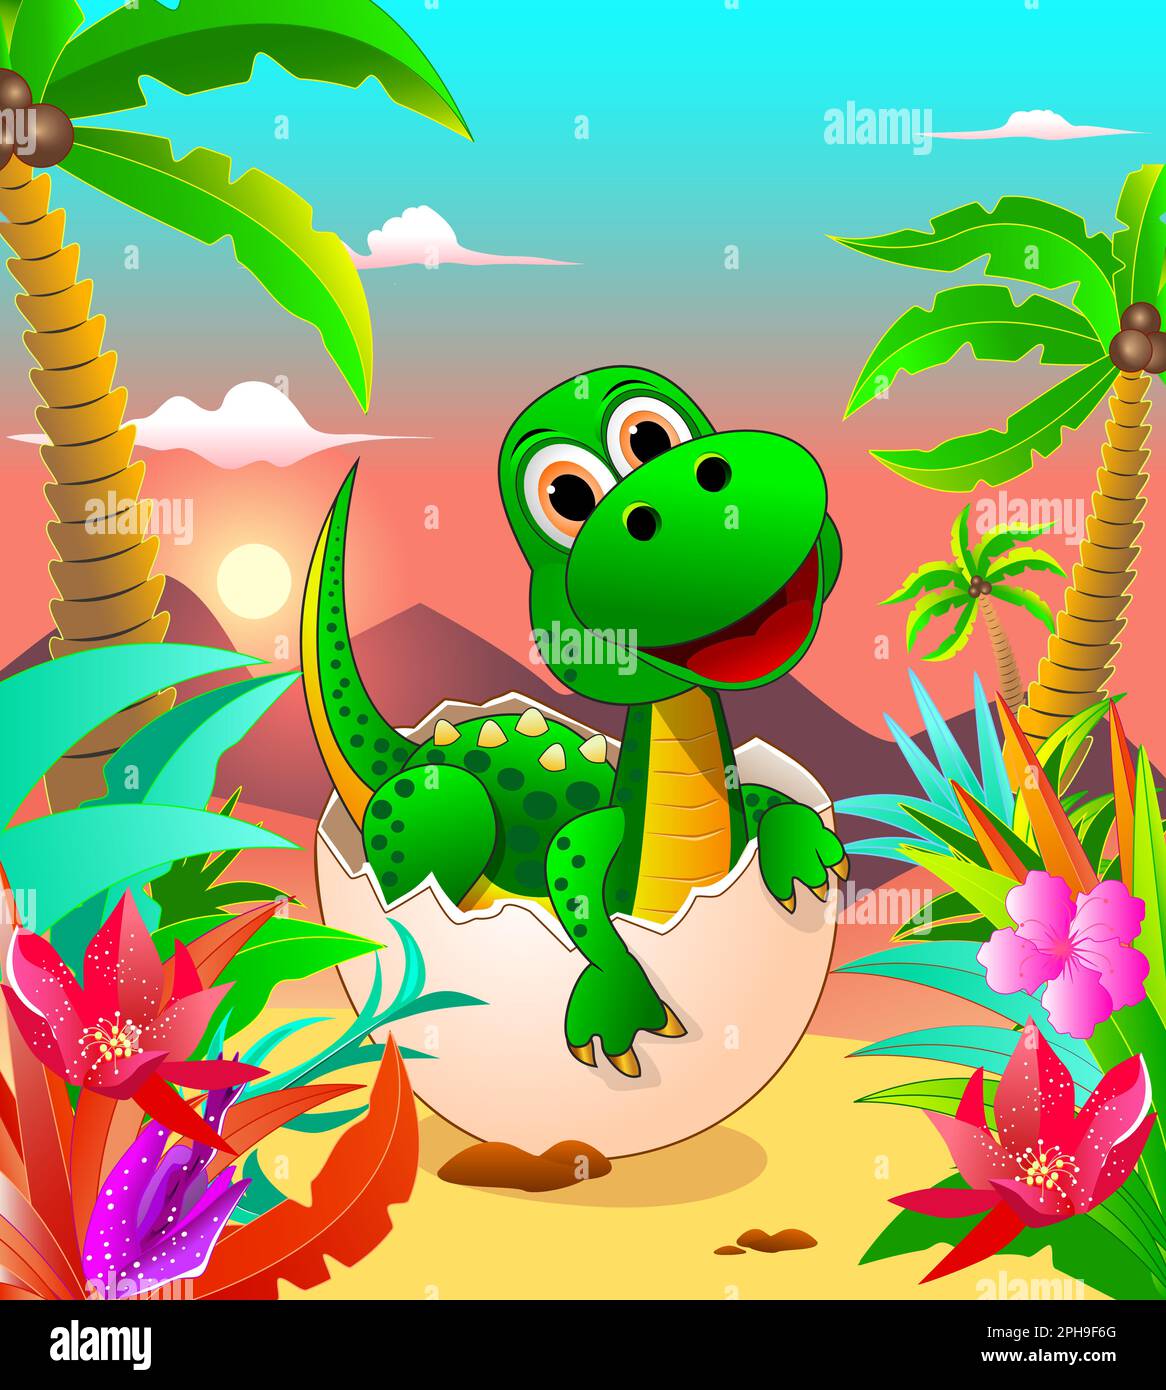 .A cartoon little dinosaur of green color sits in an egg in the background of the jungle. The birth of a dinosaur, various plants, and the sun shining Stock Vector